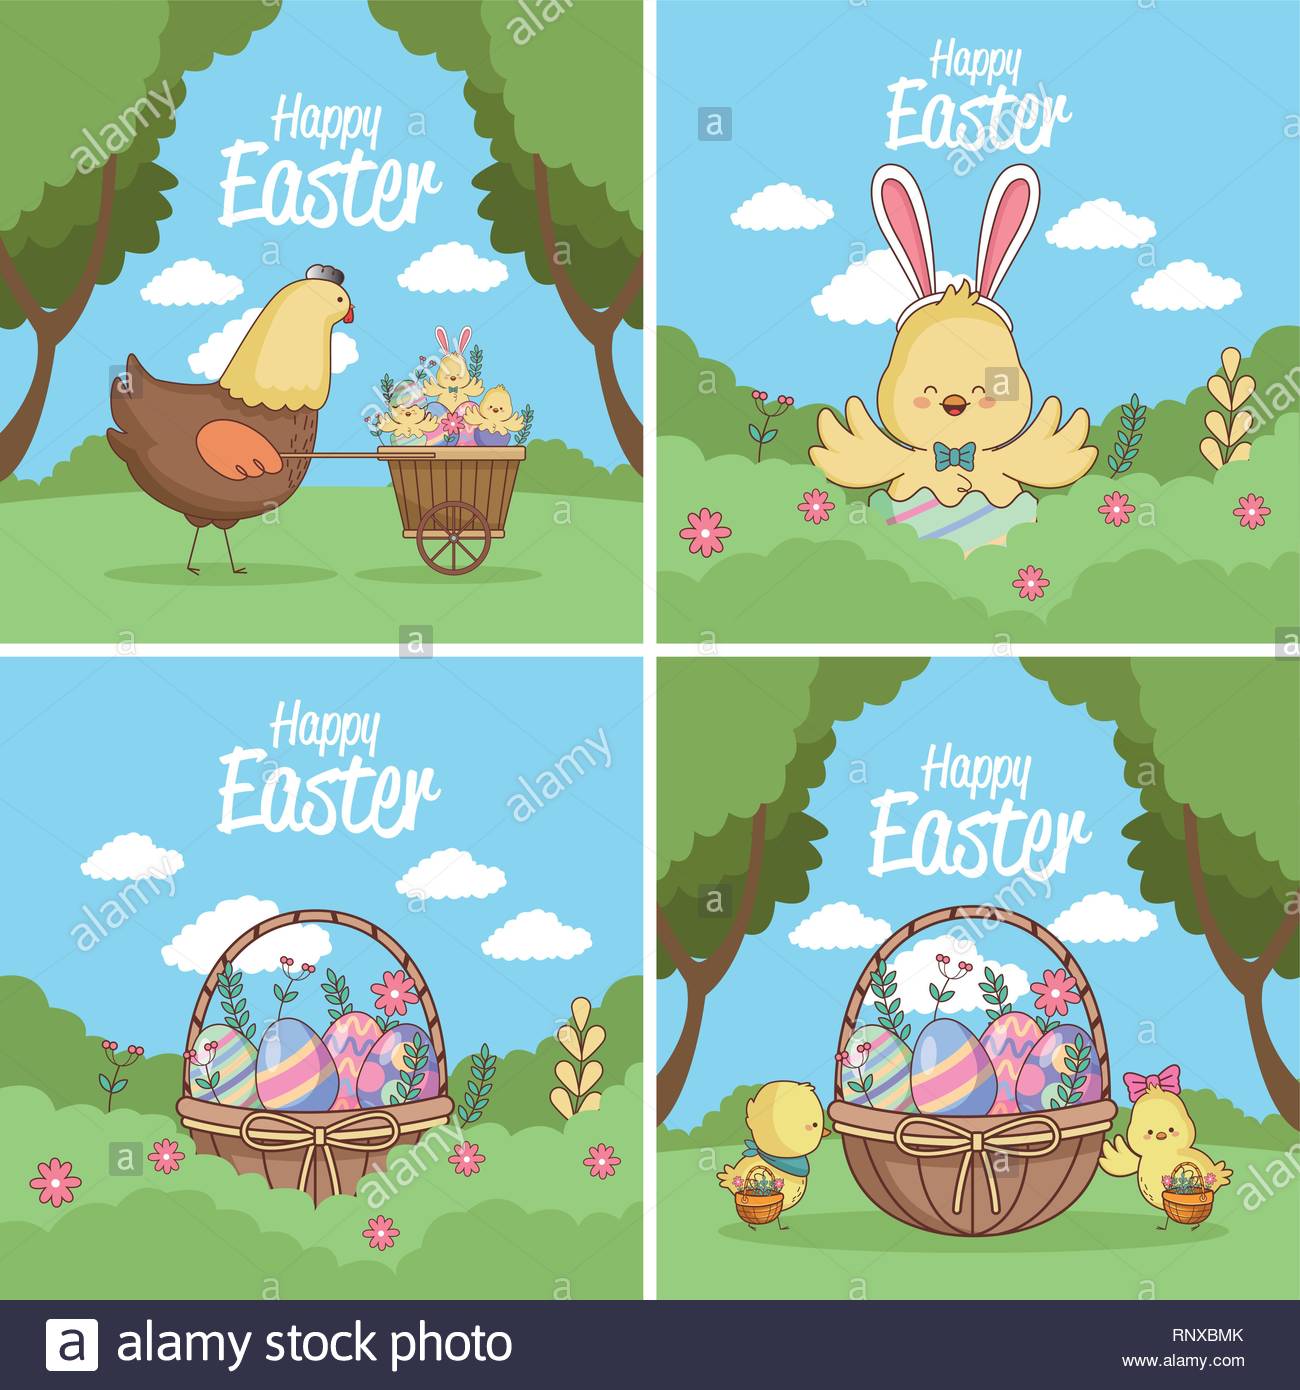 happy easter cards collection RNXBMK